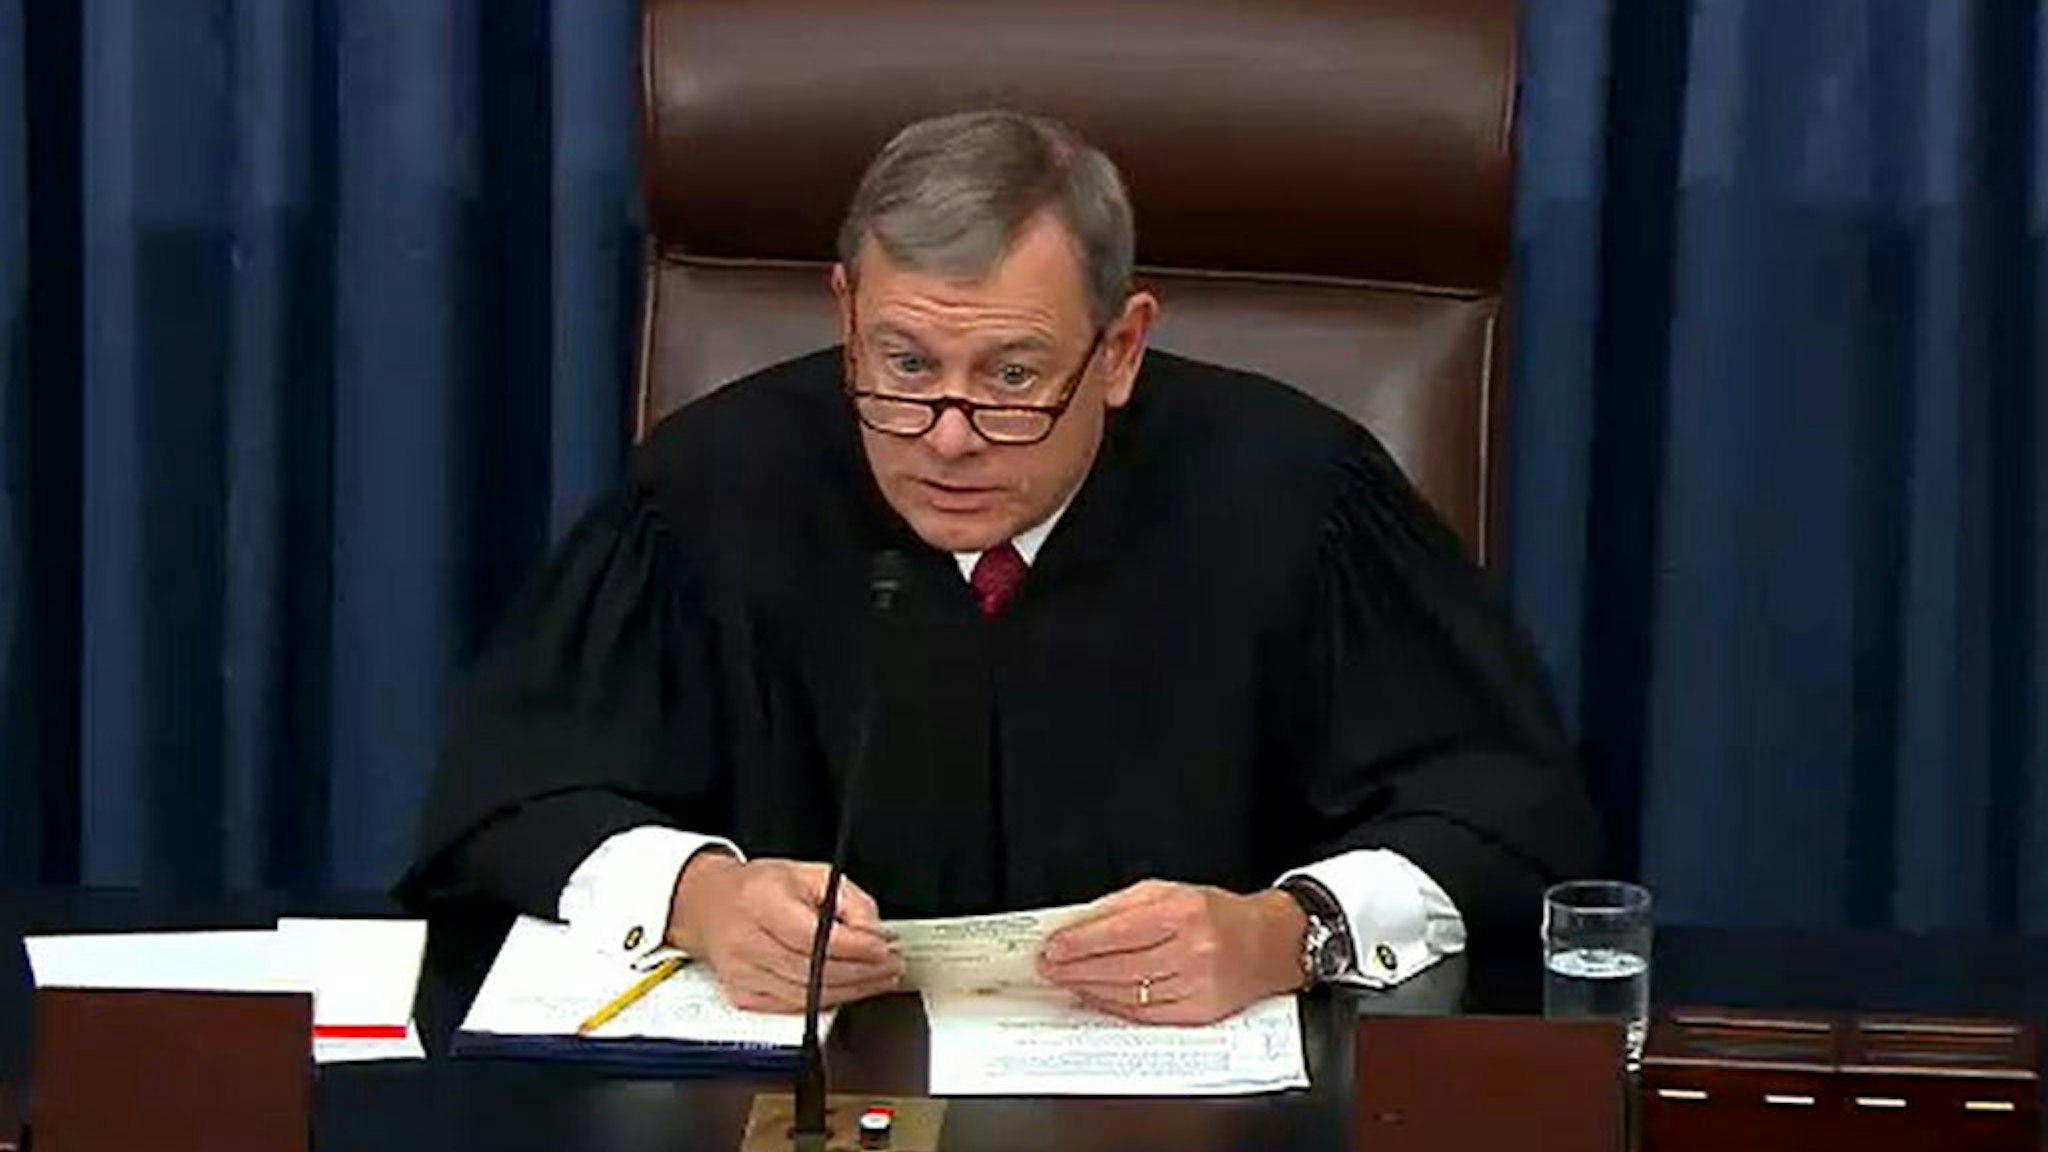 In this screengrab taken from a Senate Television webcast, Chief Justice John Roberts reads a question from a senator during impeachment proceedings against U.S. President Donald Trump in the Senate at the U.S. Capitol on January 29, 2020 in Washington, DC.